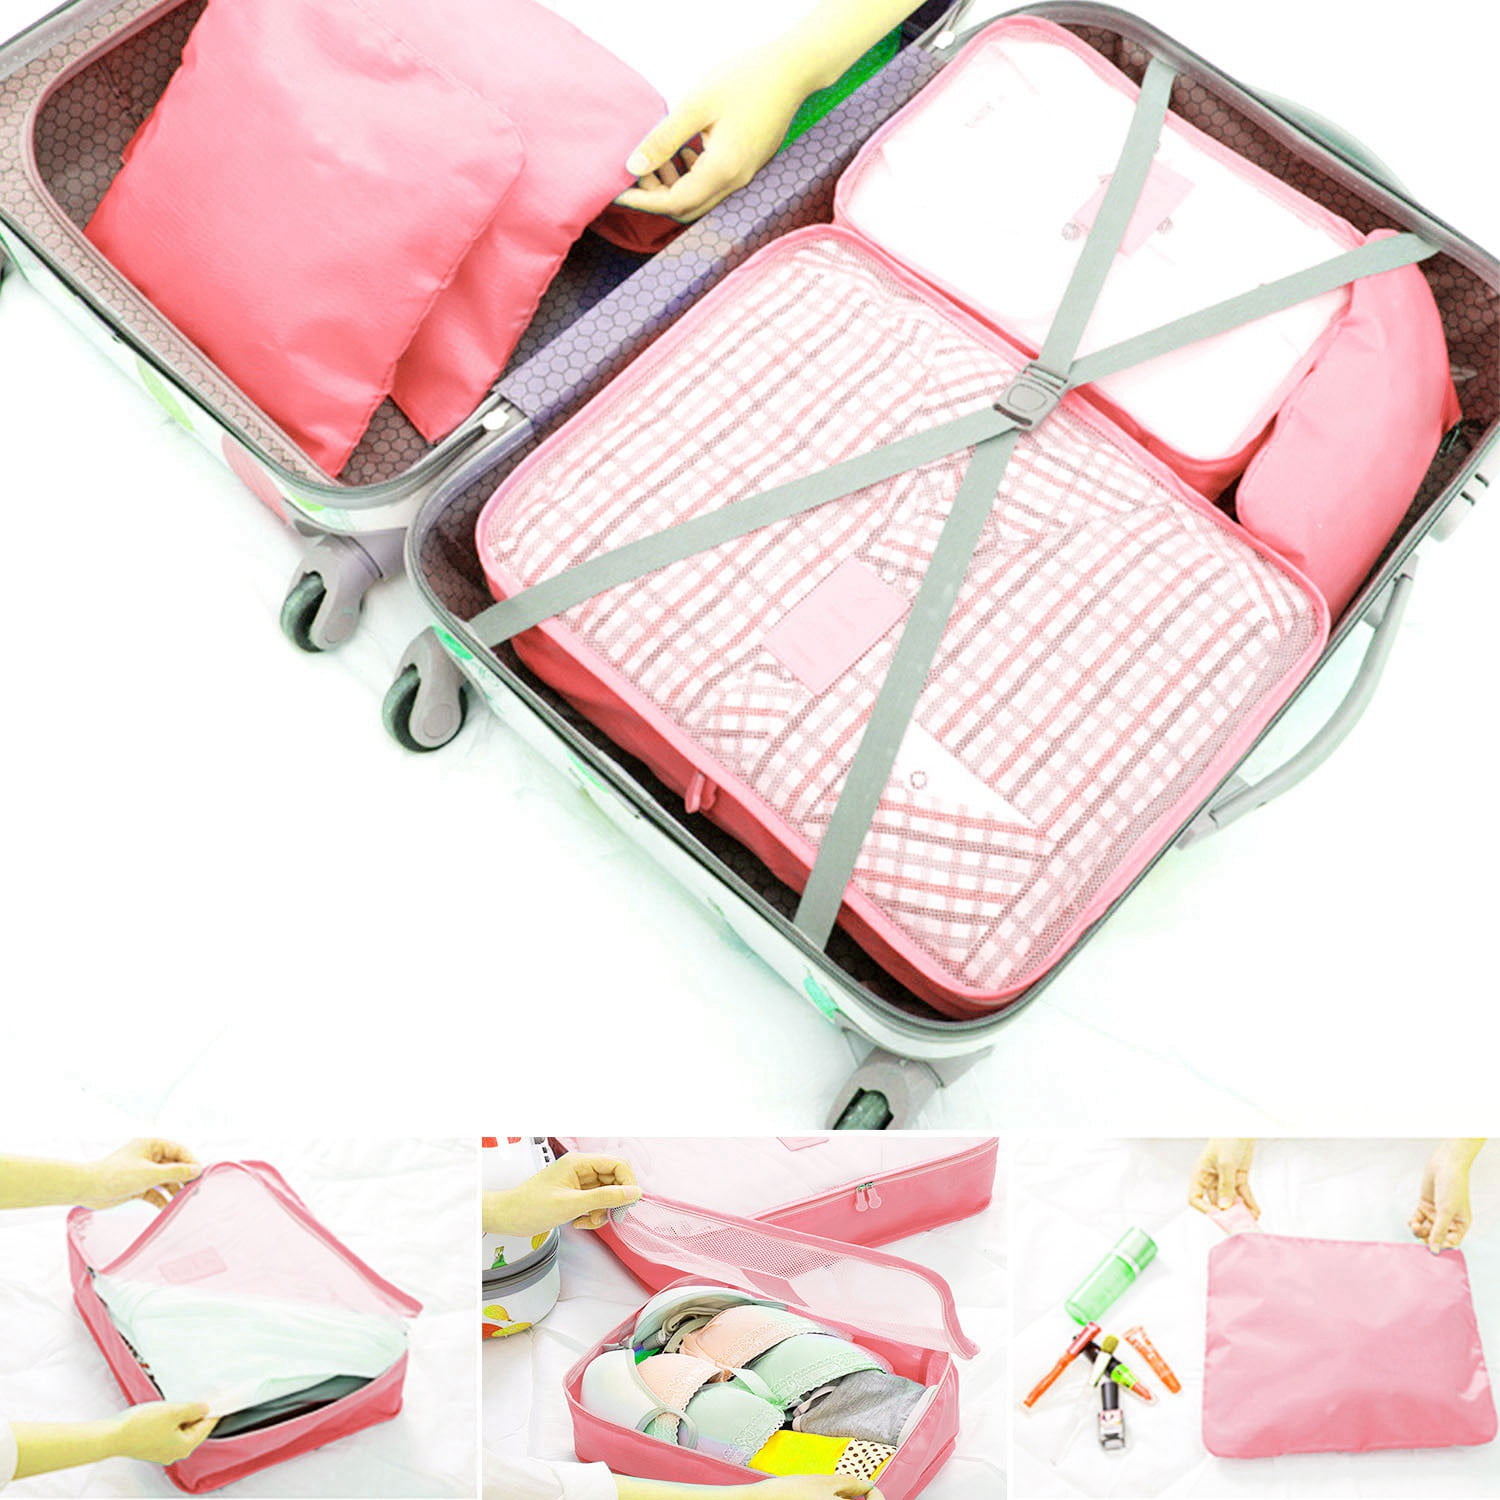 Dropship 9Pcs Clothes Storage Bags Water-Resistant Travel Luggage Organizer  Clothing Packing Cubes to Sell Online at a Lower Price